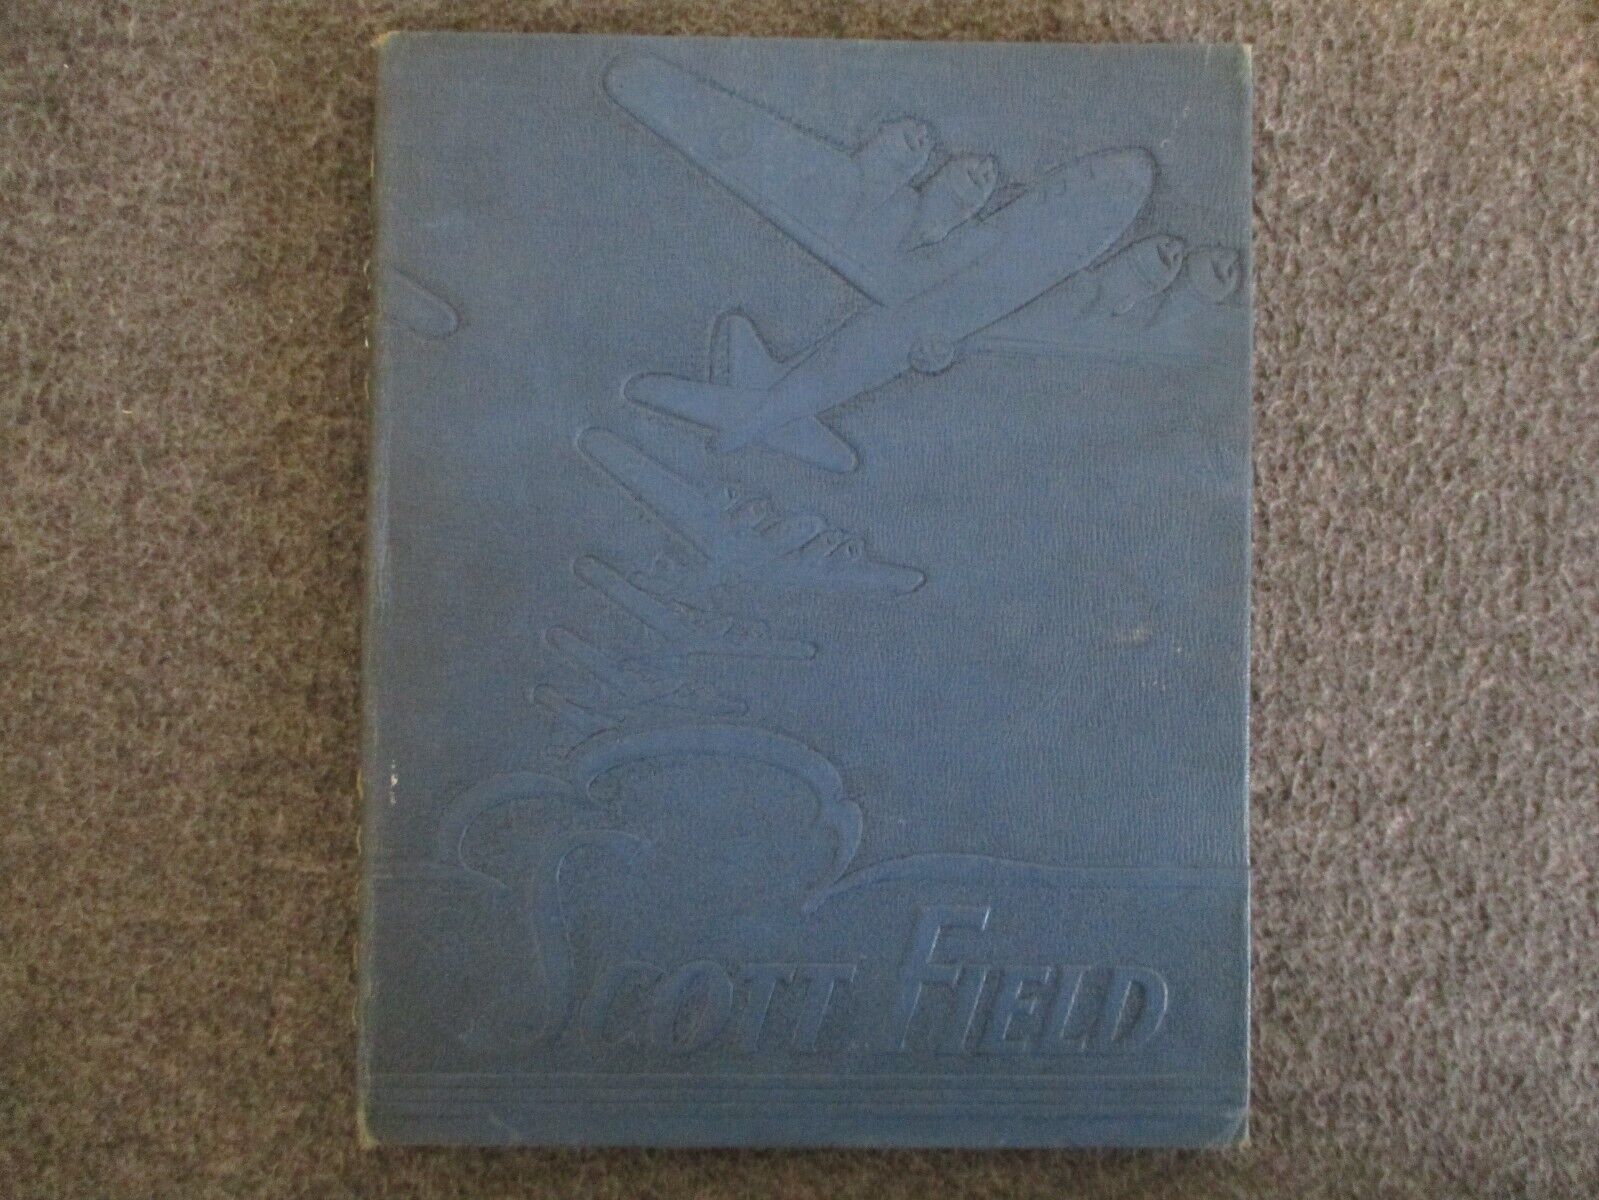 1941-42 SCOTT FIELD ARMY AIR FORCES TECHNICAL TRAINING COMMAND PICTORIAL REVIEW